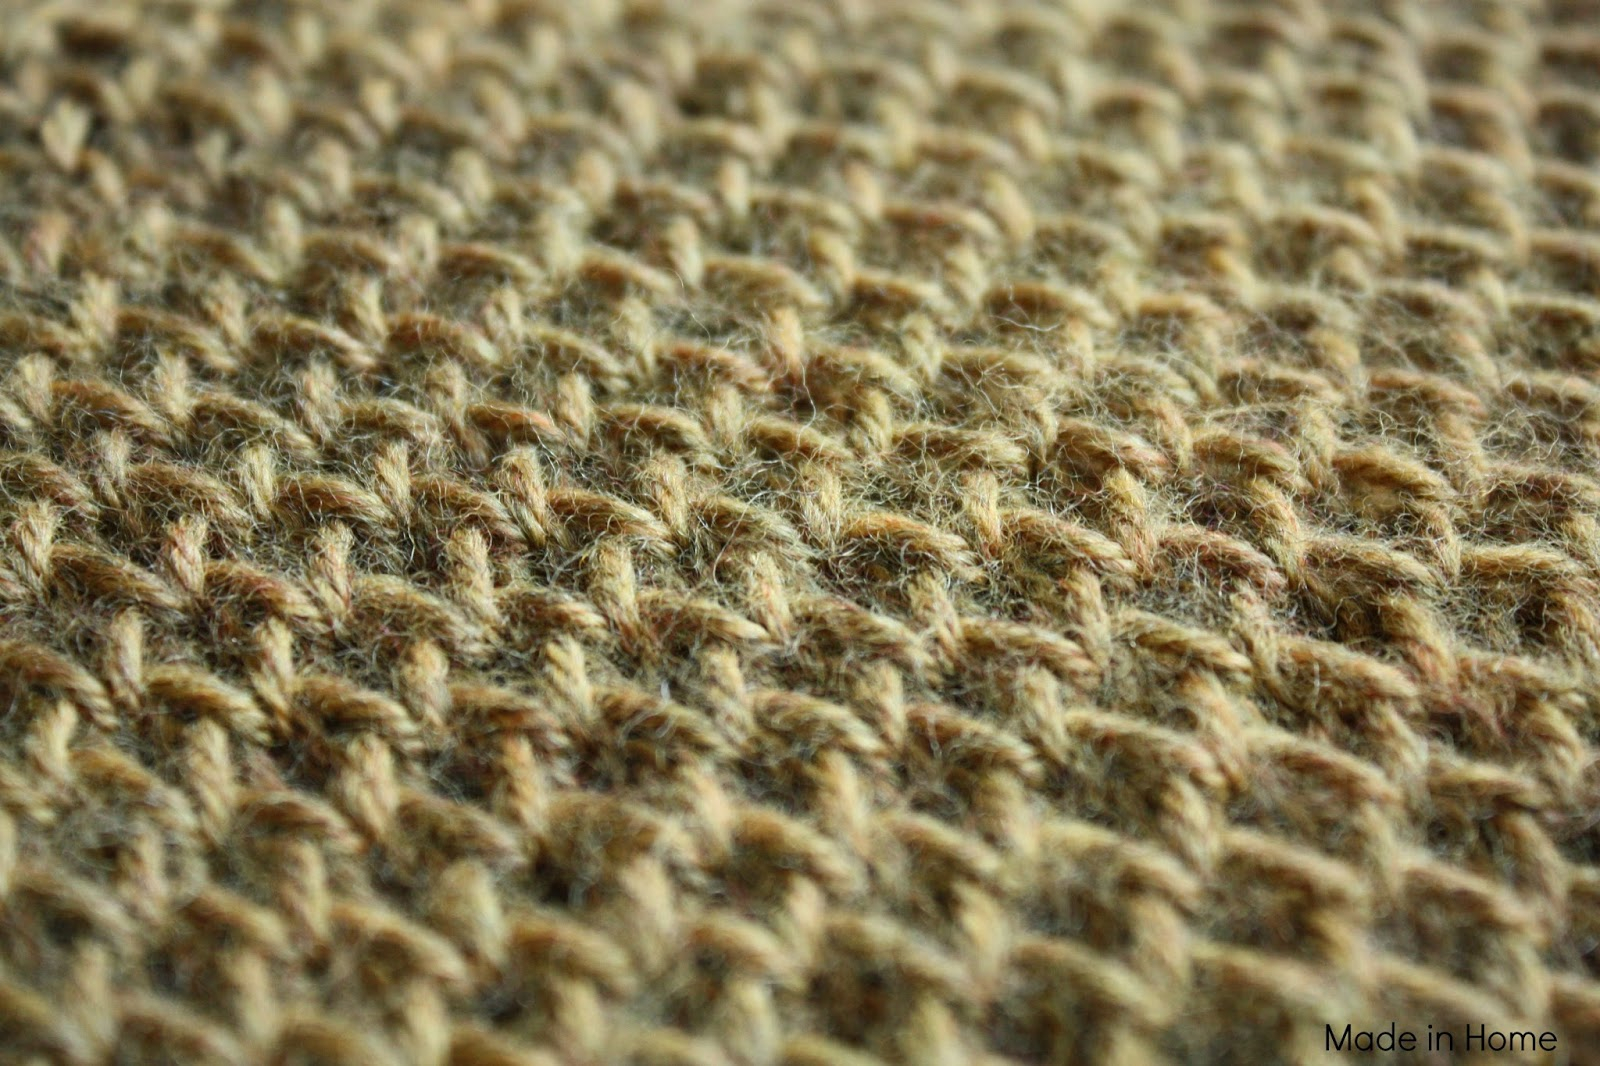 Honeycomb Knitting Stitch Pattern Made In Home Study Of Honeycomb Knitting